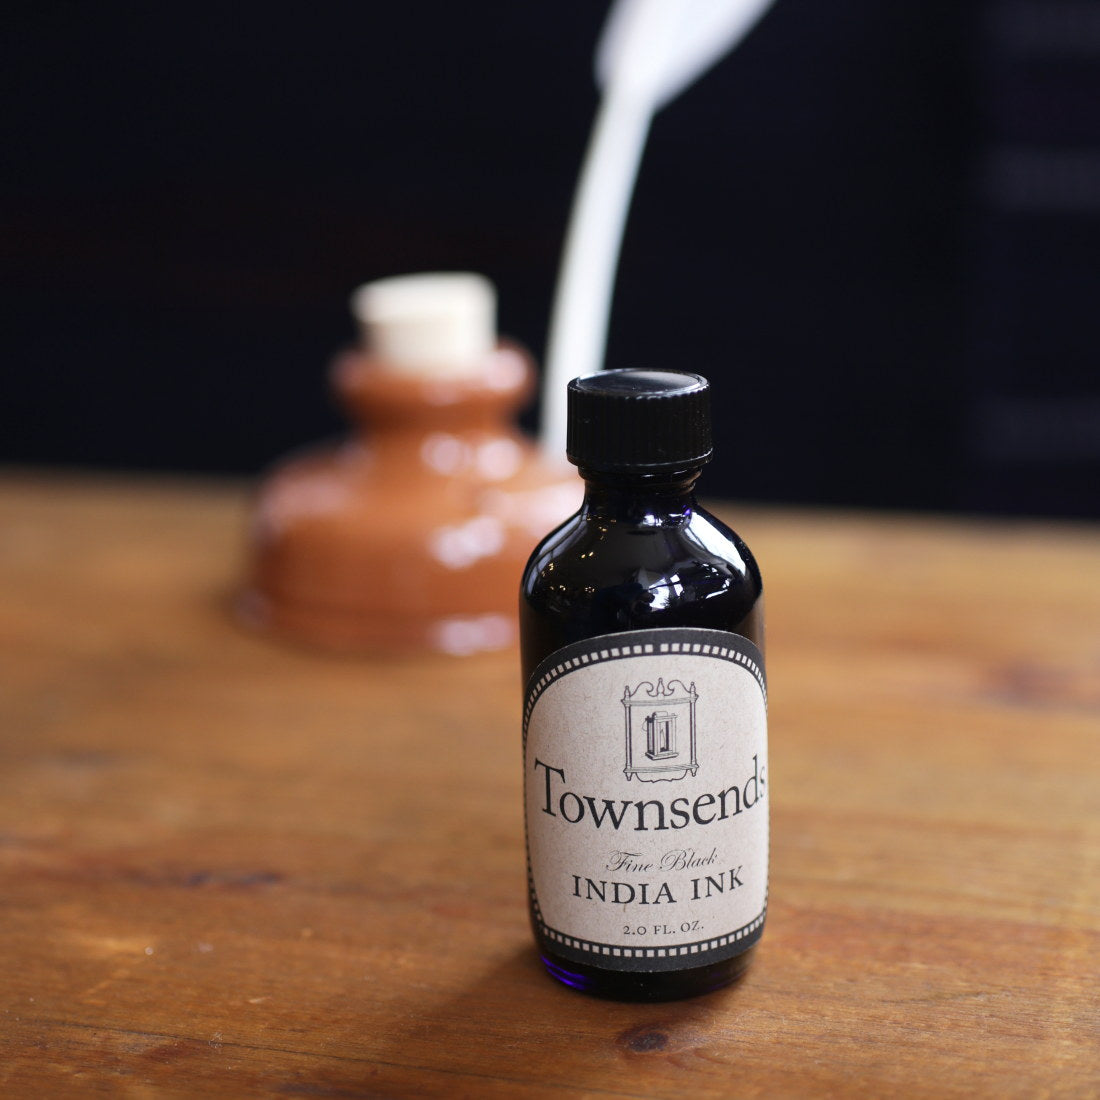 Townsend's India Ink – Townsends